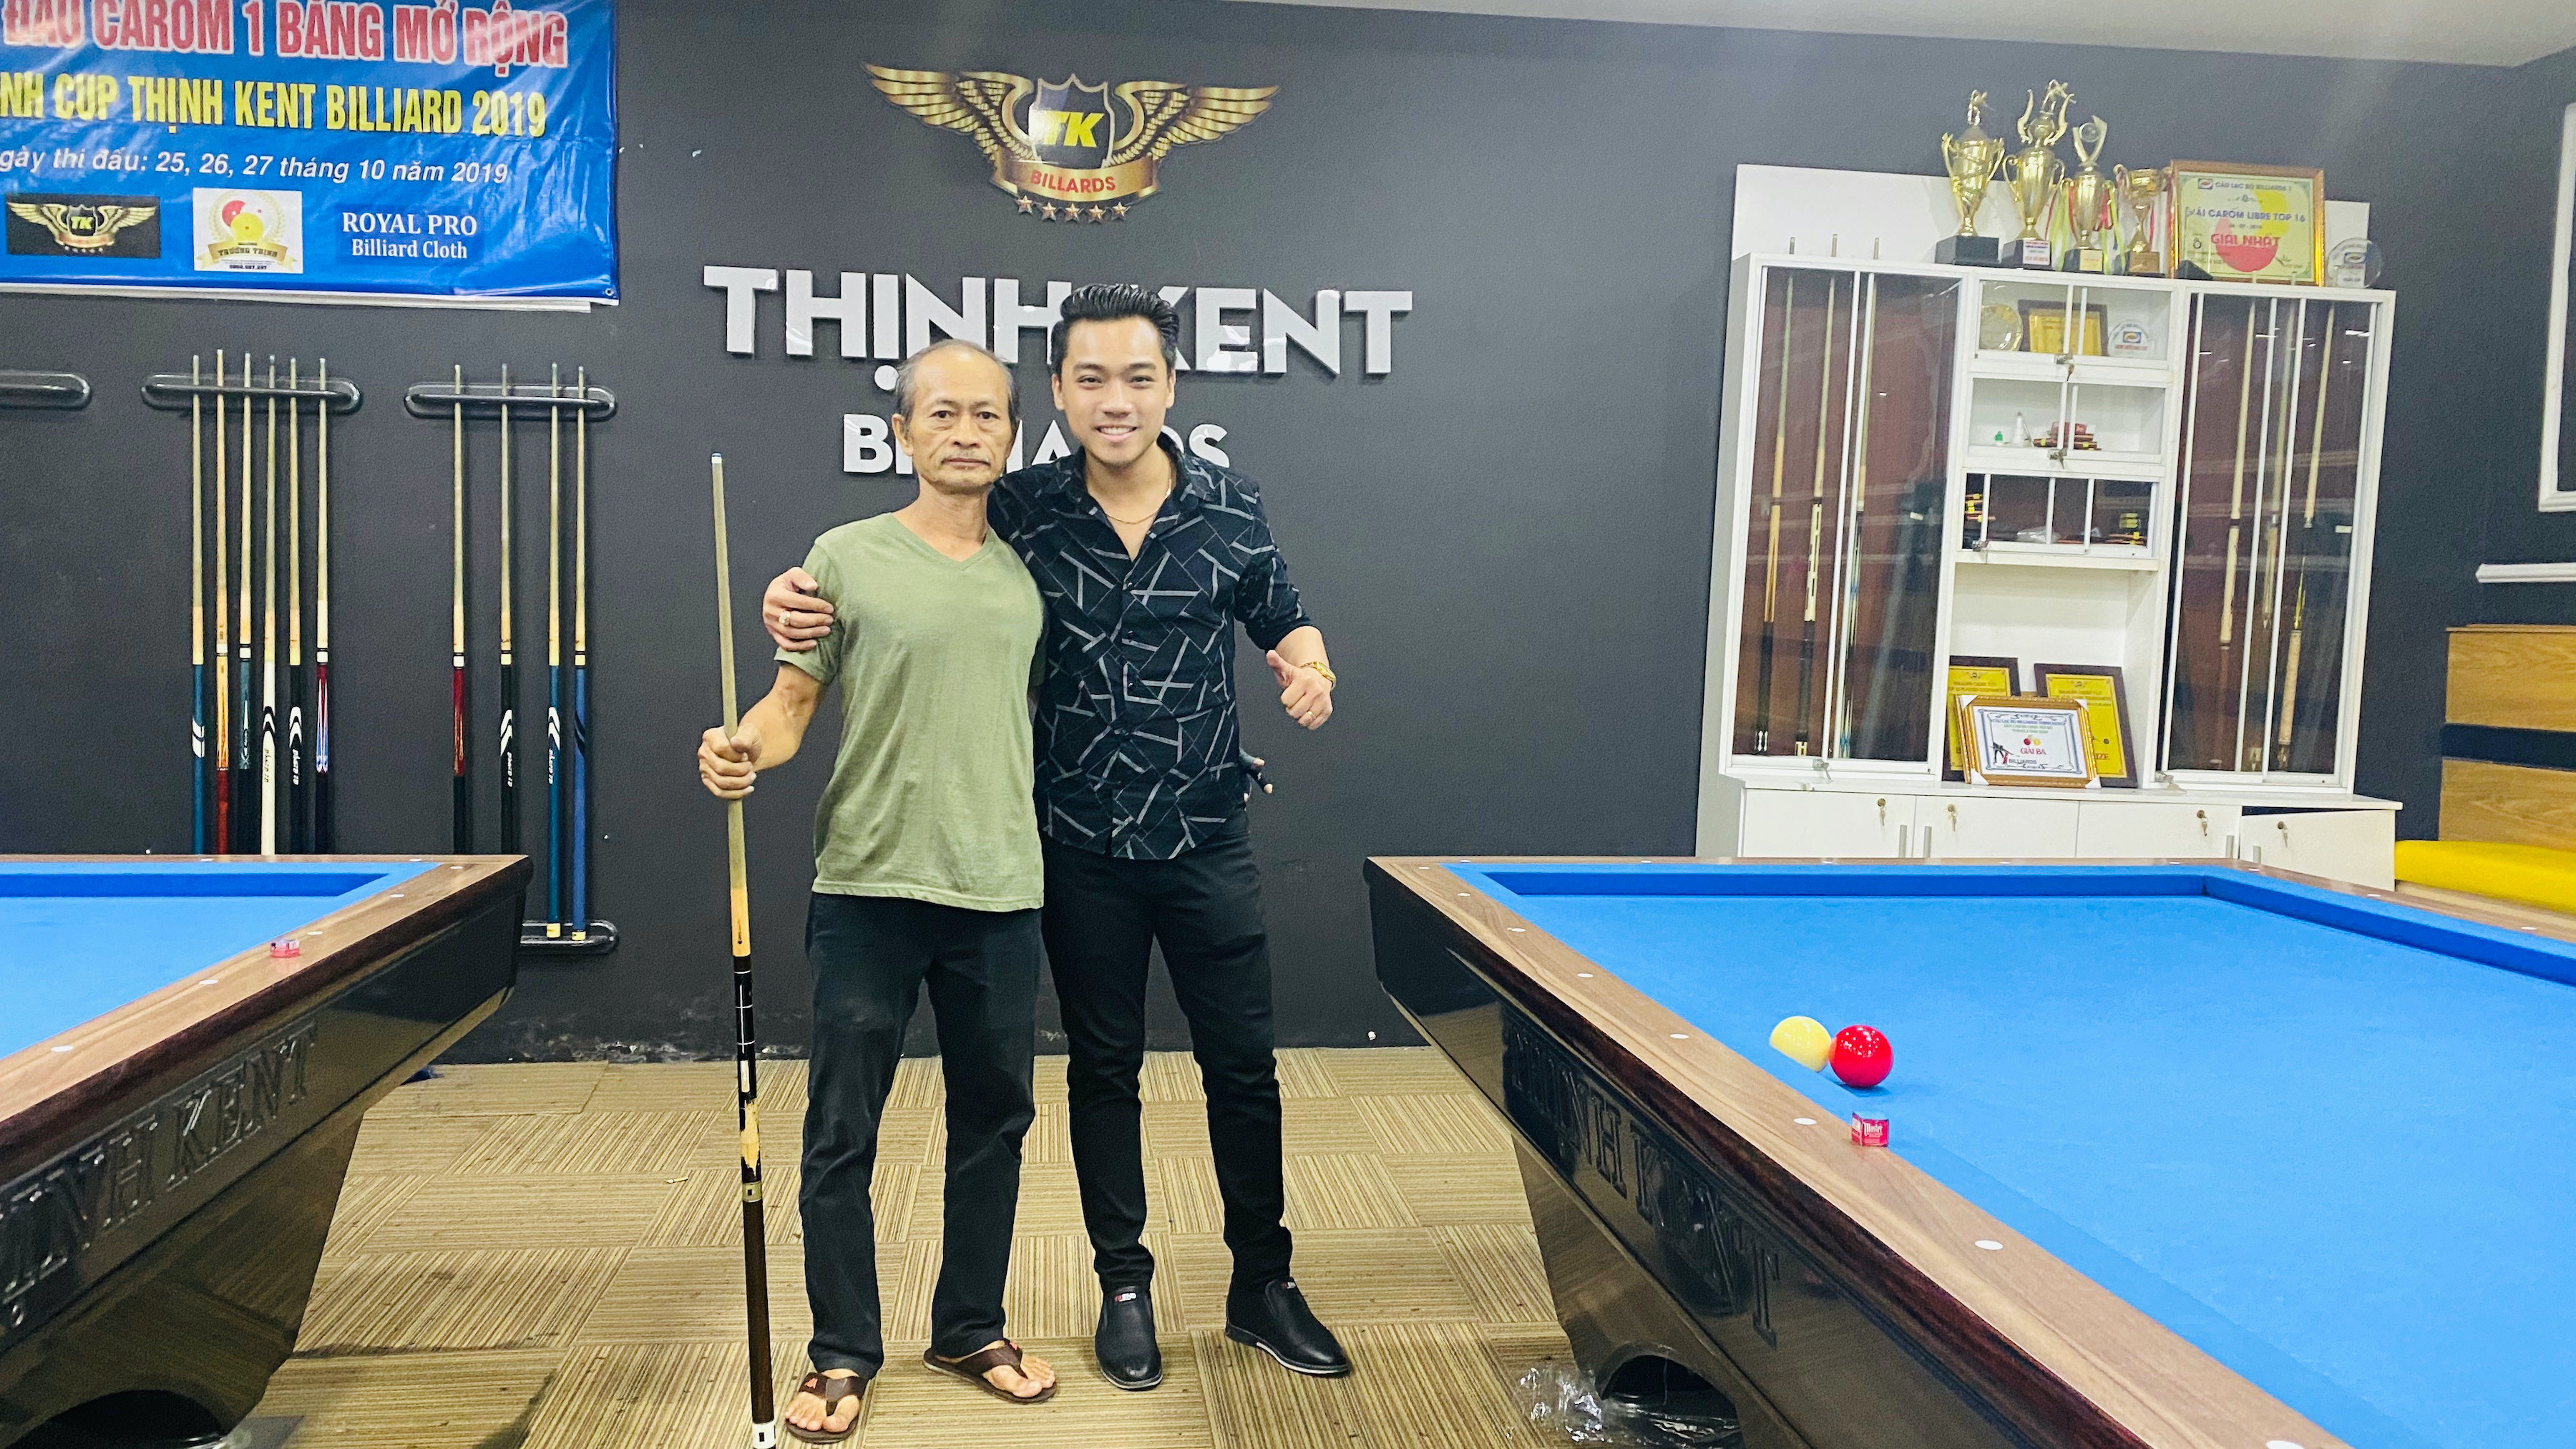 This supplied photo shows Huynh Truong Thinh (right) and his billiards mentor, Truong, at a club in Ho Chi Minh City.